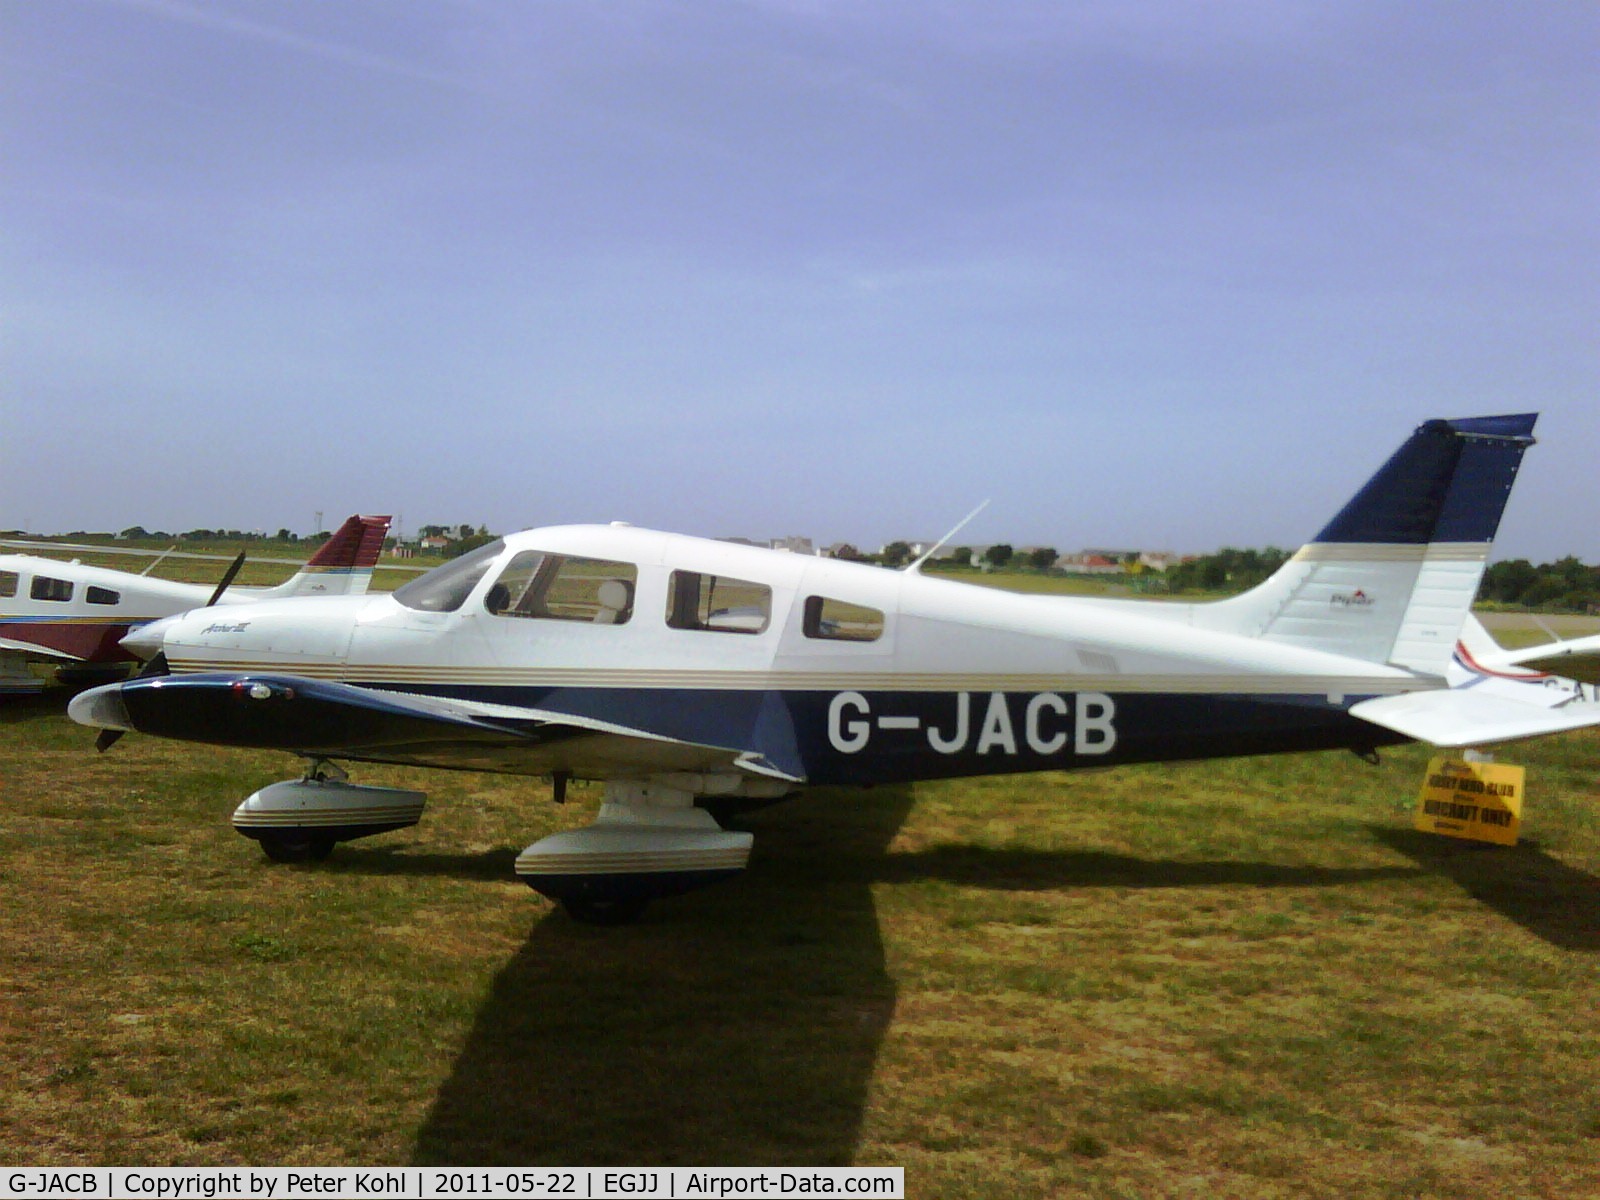 G-JACB, 1999 Piper PA-28-181 Cherokee Archer III C/N 2843278, Parked at Jersey Aero Club